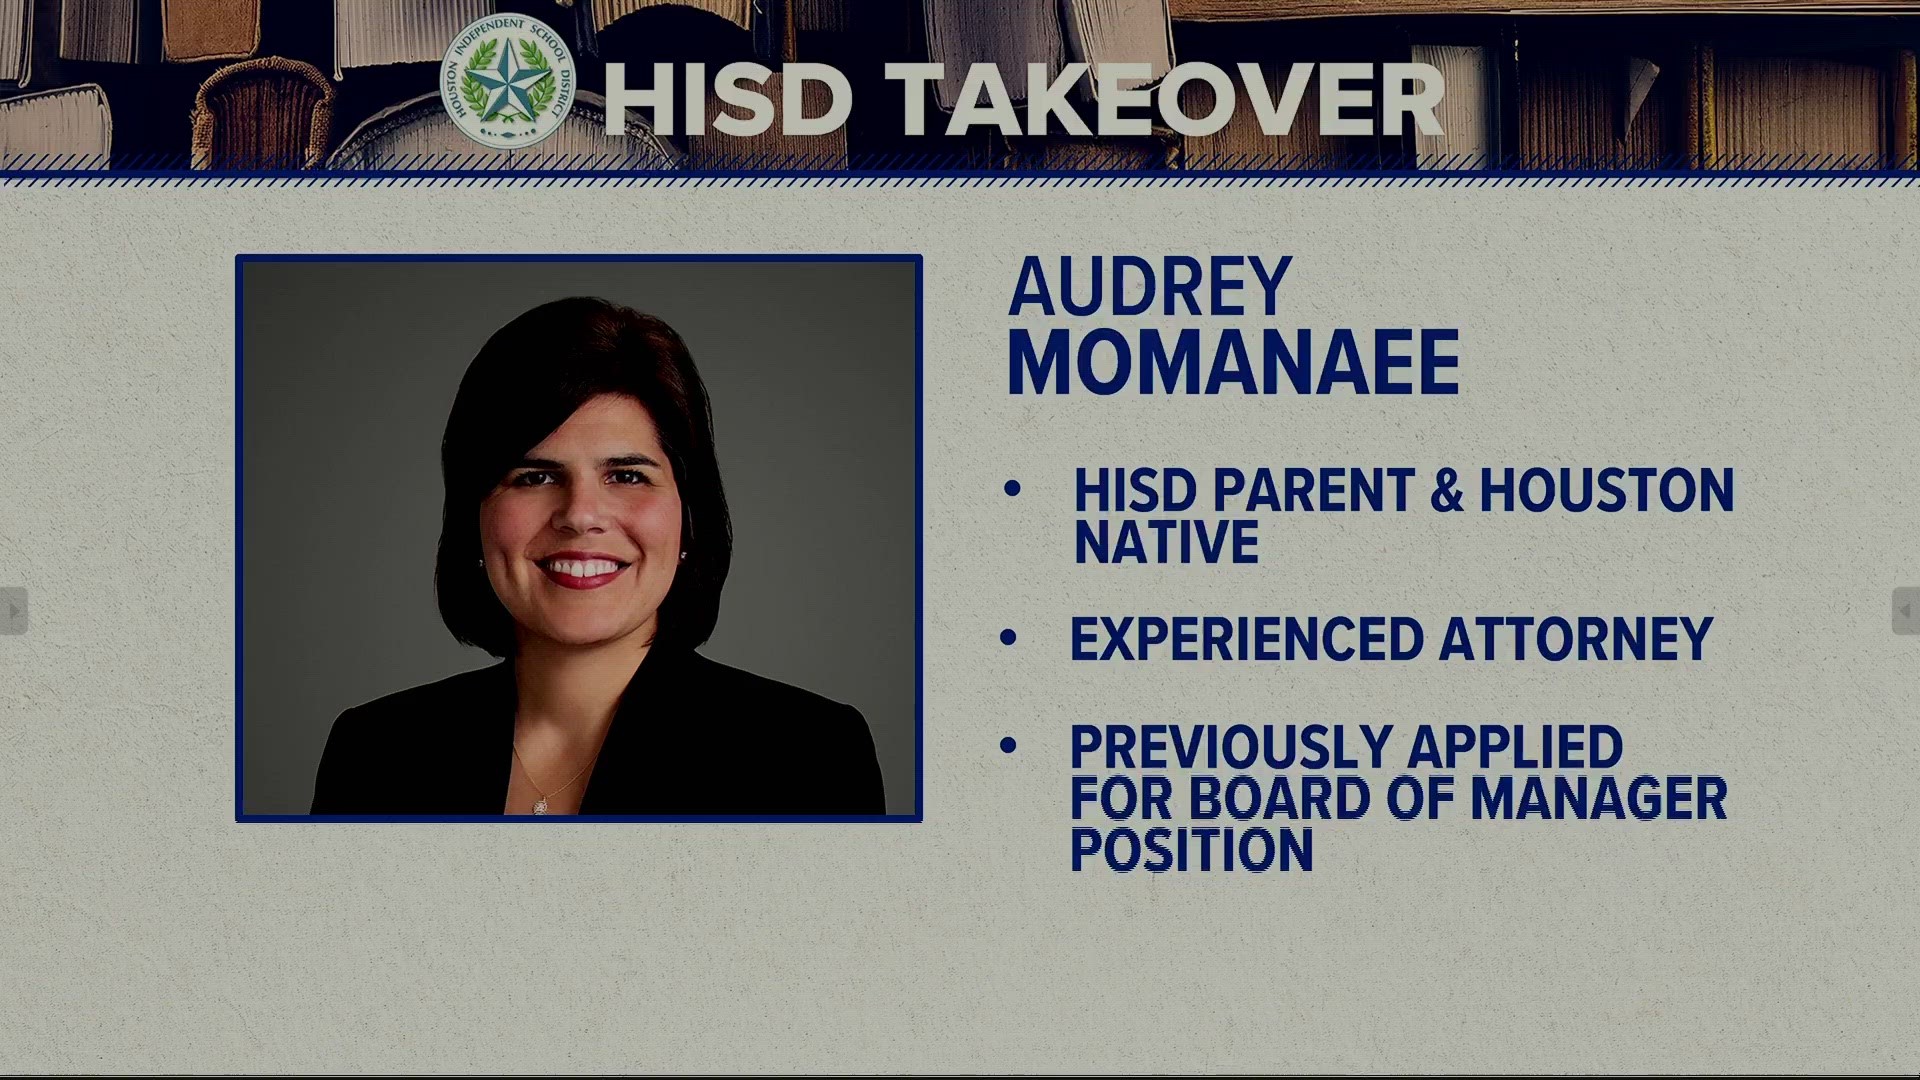 Six women and three men were named to the new HISD Board of Managers out of the more than 400 applicants.